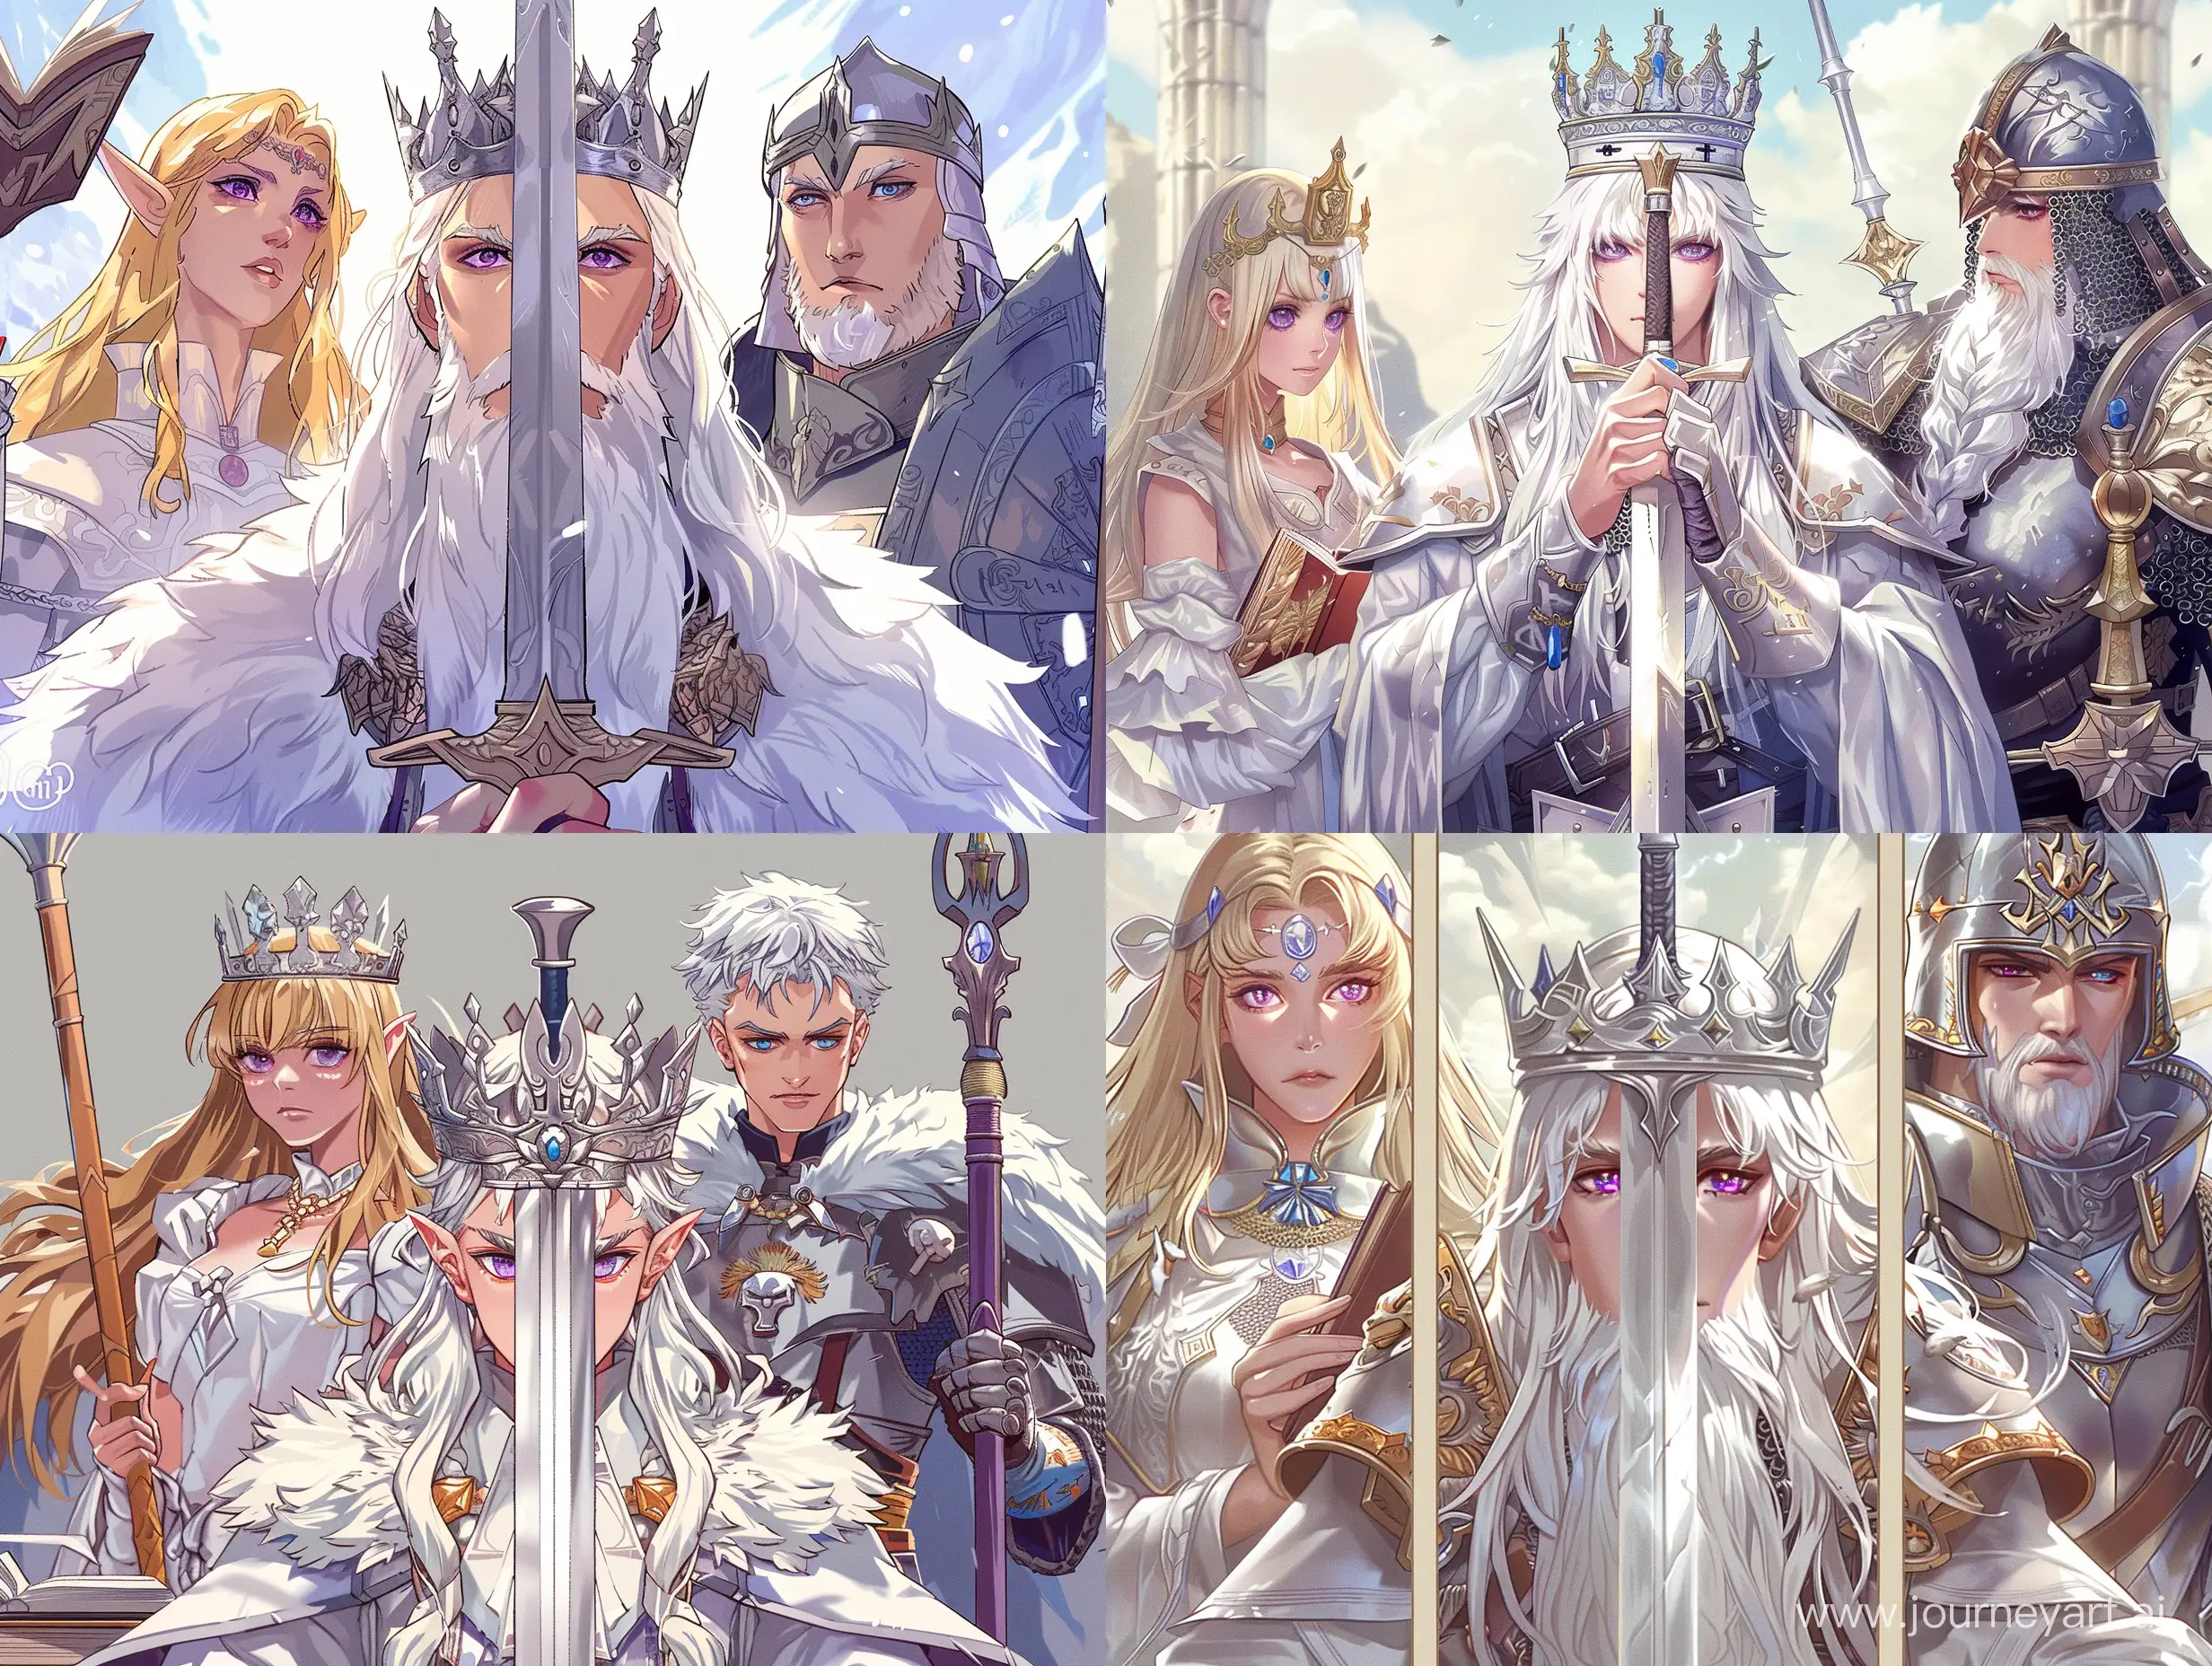 Draw art: in the center is a young man with a white beard in a silver crown, with long and snow-white hair, violet eyes, holding a sword vertically down with two hands. To the left of the man in the crown stands a beautiful girl in white and elegant attire with golden long hair and violet eyes, she looks to the left of the man with her head raised and holds a book in her hands. To the right of the man in the crown stands a warrior completely clad in armor, but there is no helmet on his head, he has medium-length snow-white hair and blue eyes, he looks with his head raised to the right of the man in the crown and holds a shield and spear in his hands. All this is not in the anime style, but in the style of the game Crusader kings 3.